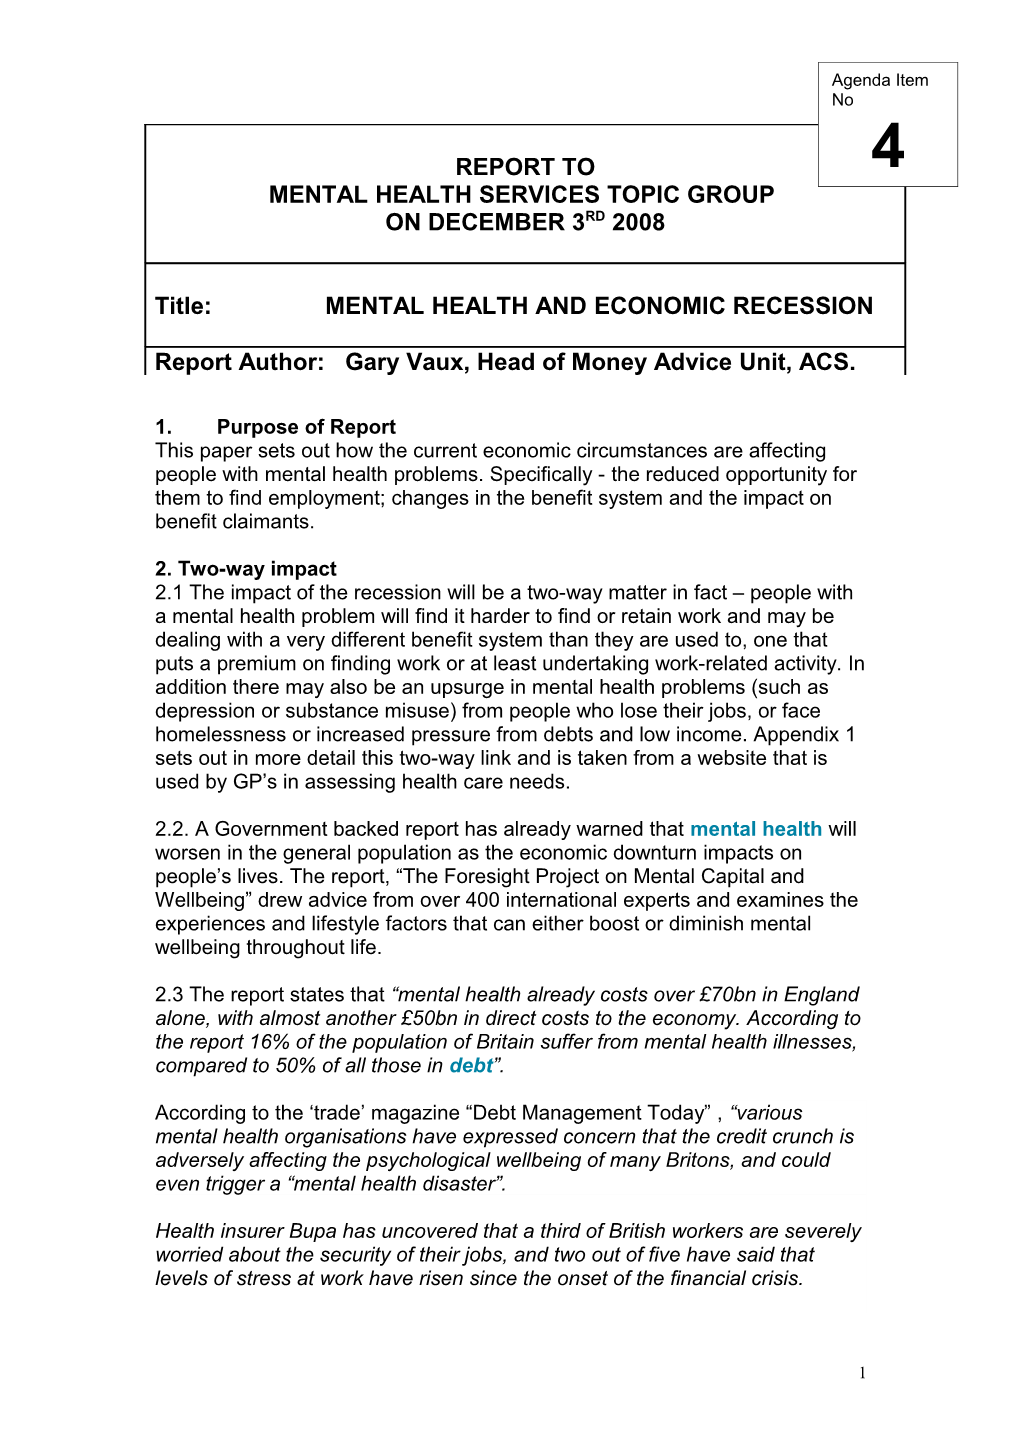 Recession and Mental Health